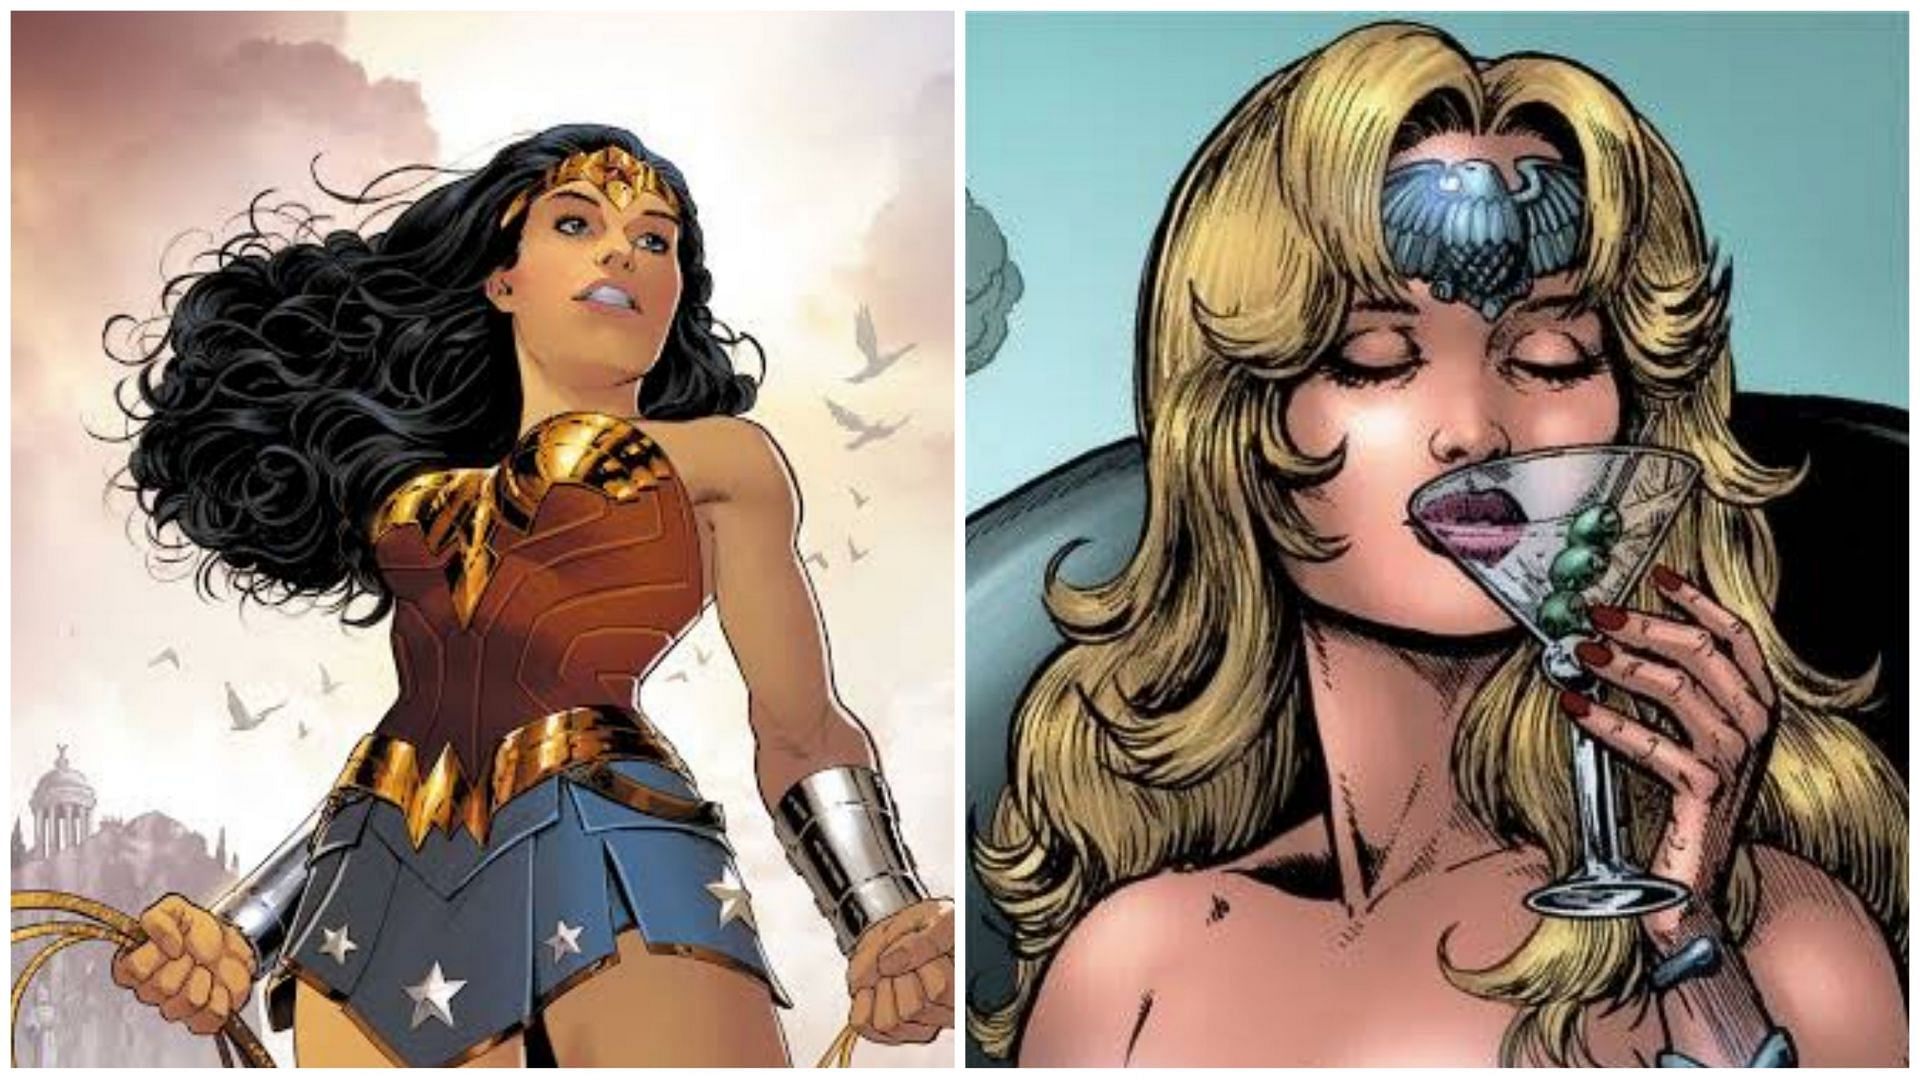 Queen Maeve and Wonder Woman are big parts of their comics (Images via Dynamite Entertainment and DC Comics)